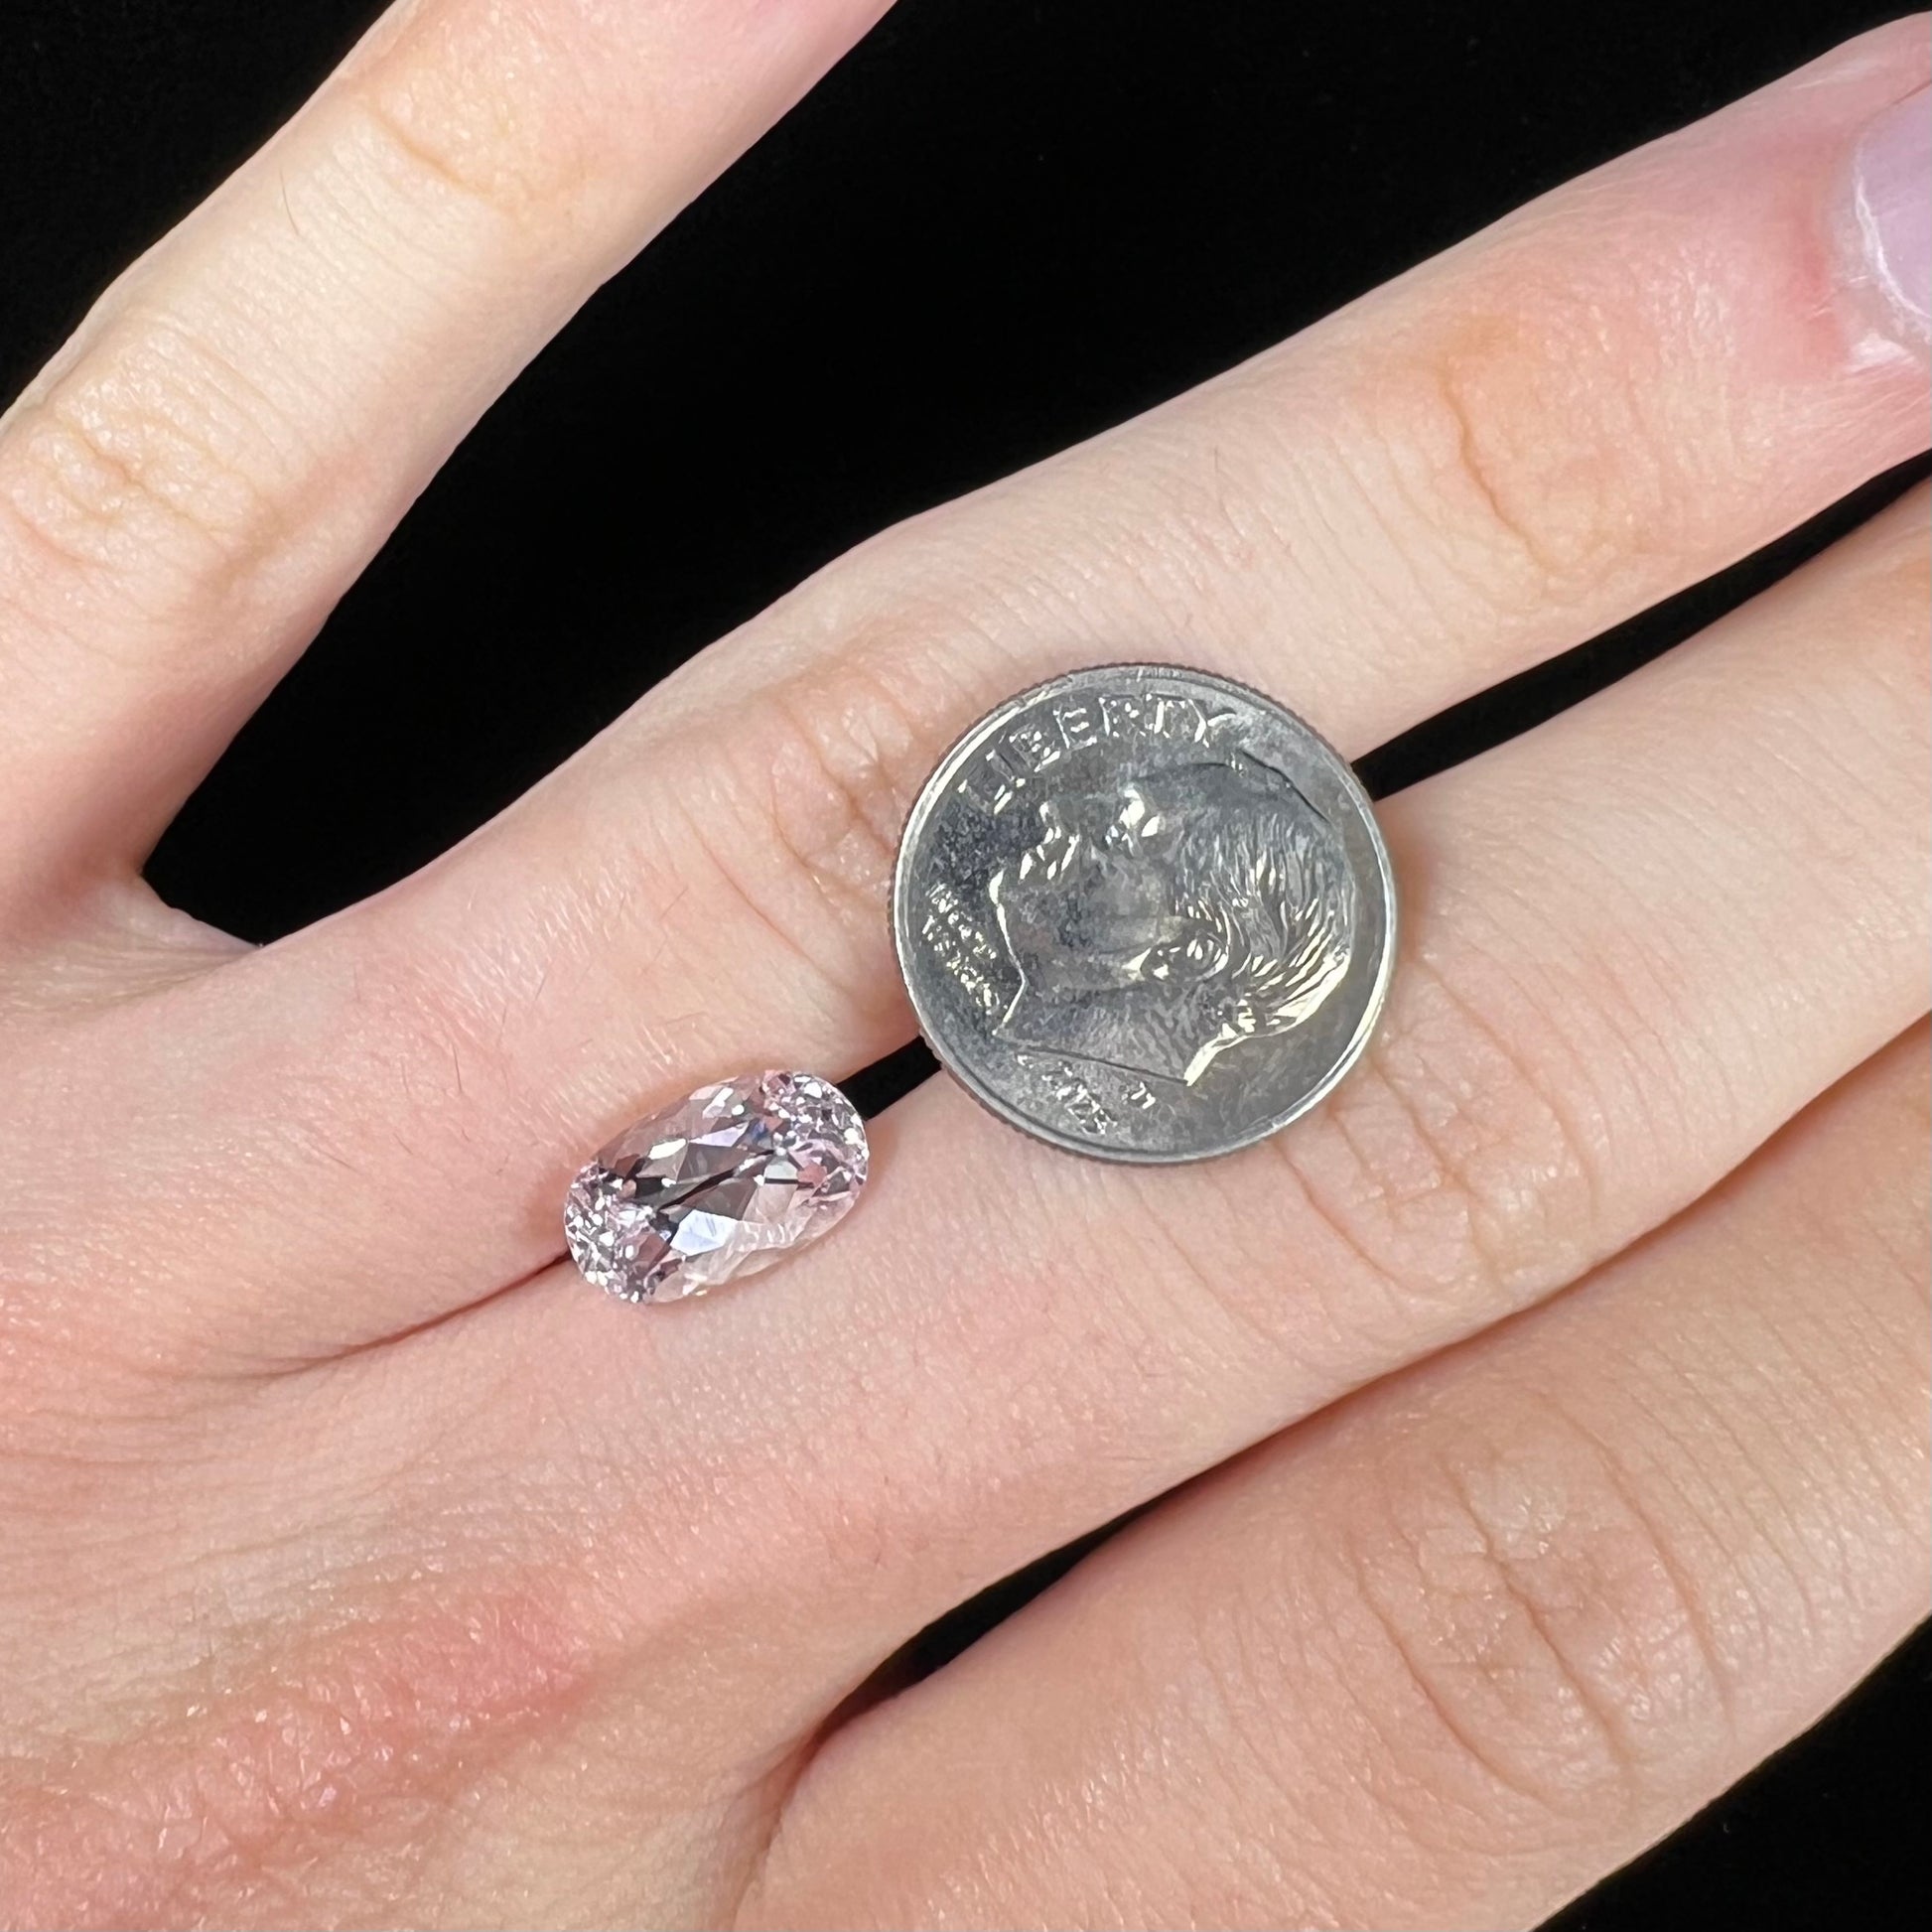 A loose, faceted oval cut kunzite gemstone.  The stone is a light pink color.